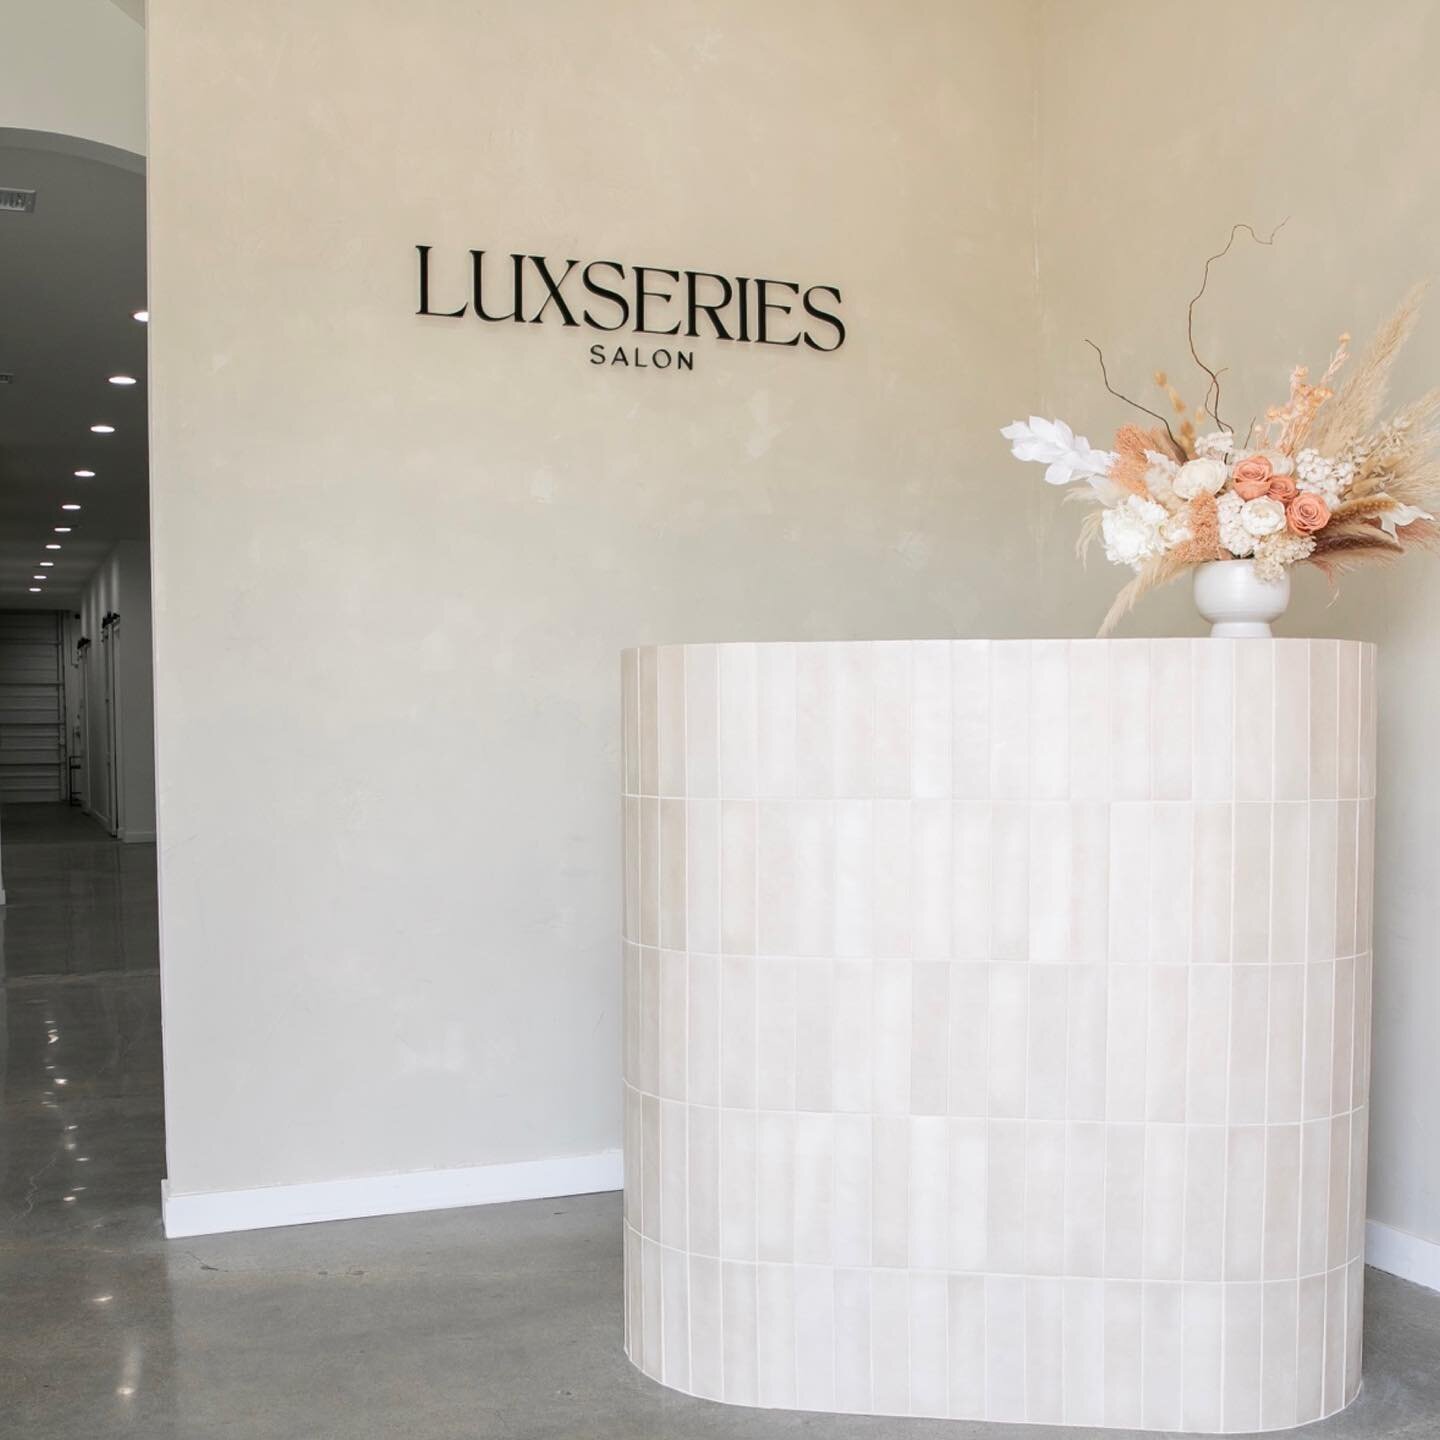 Welcome to Luxseries Salon ✨ where beauty meets elegance. Indulge in the lap of luxury at our all-inclusive beauty salon. Treat yourself to the ultimate pampering experience with our range of top-notch services. ✨

#Luxurybeauty
#johnwayneairport #ha